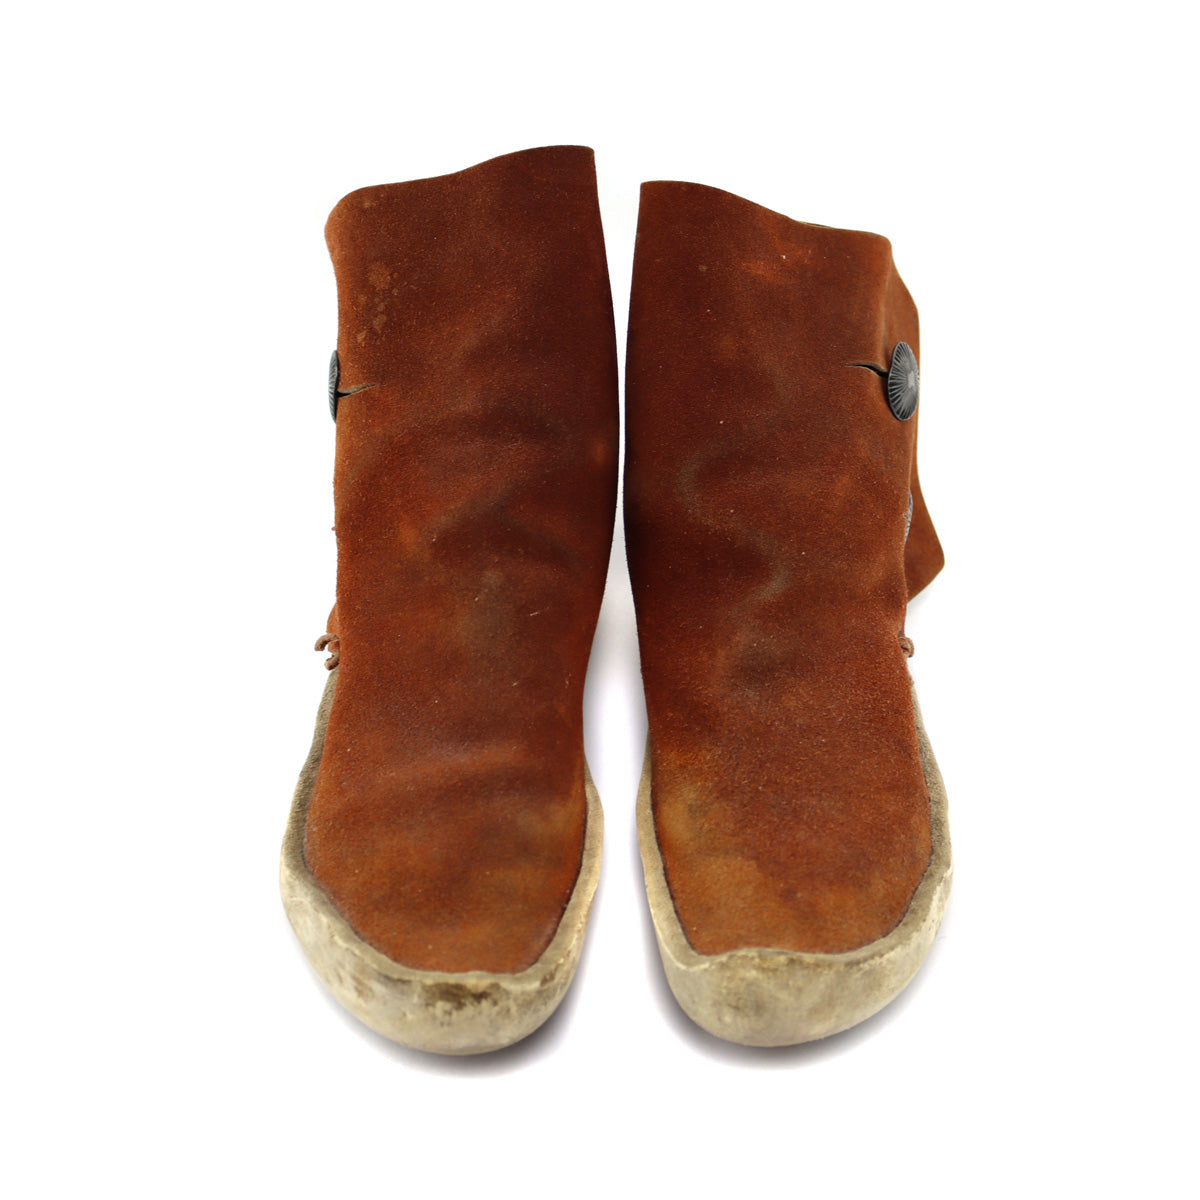 Navajo Style - Leather Moccasins with Navajo Silver Buttons c. 1960-70s (DW1347)